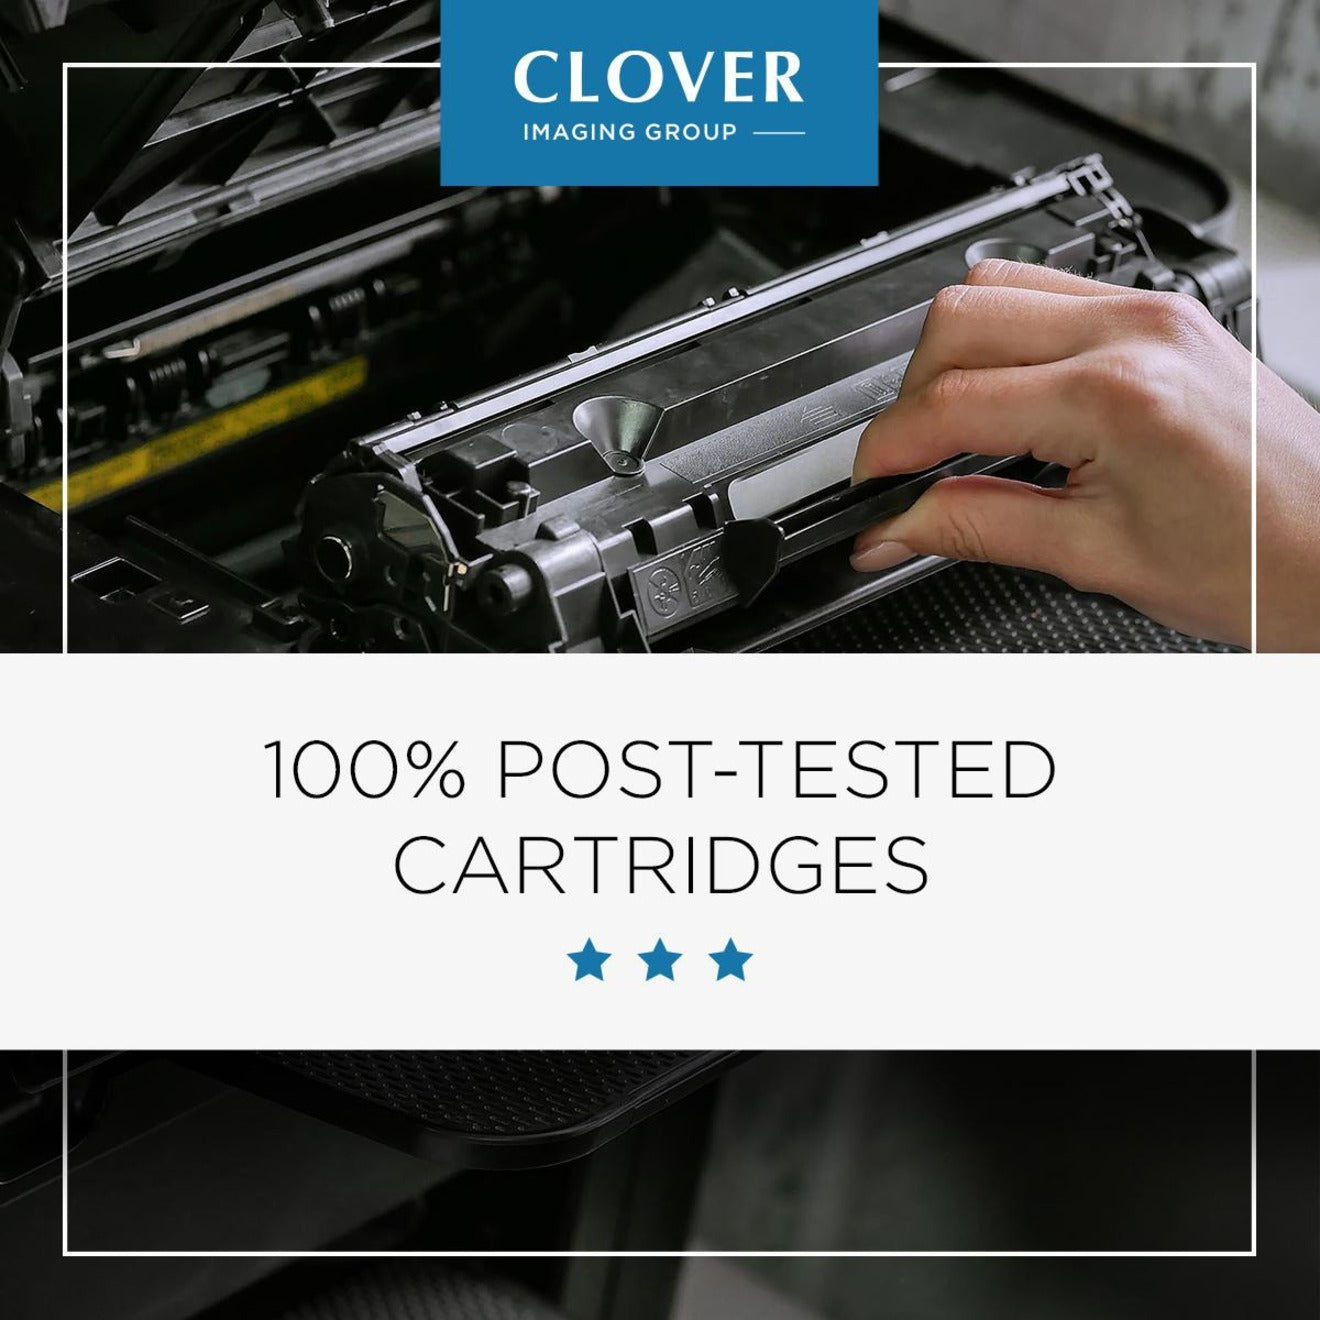 Clover Technologies Remanufactured MICR Toner Cartridge - Alternative for HP Troy Canon 11A 11X 710 710H (Q6511A Q6511X 02-81133-001 Q6511A(M) 0985B001 0985B001AA 0986B001 0986B001AA 985B001 985B001AA 986B001 ...) - Black Pack